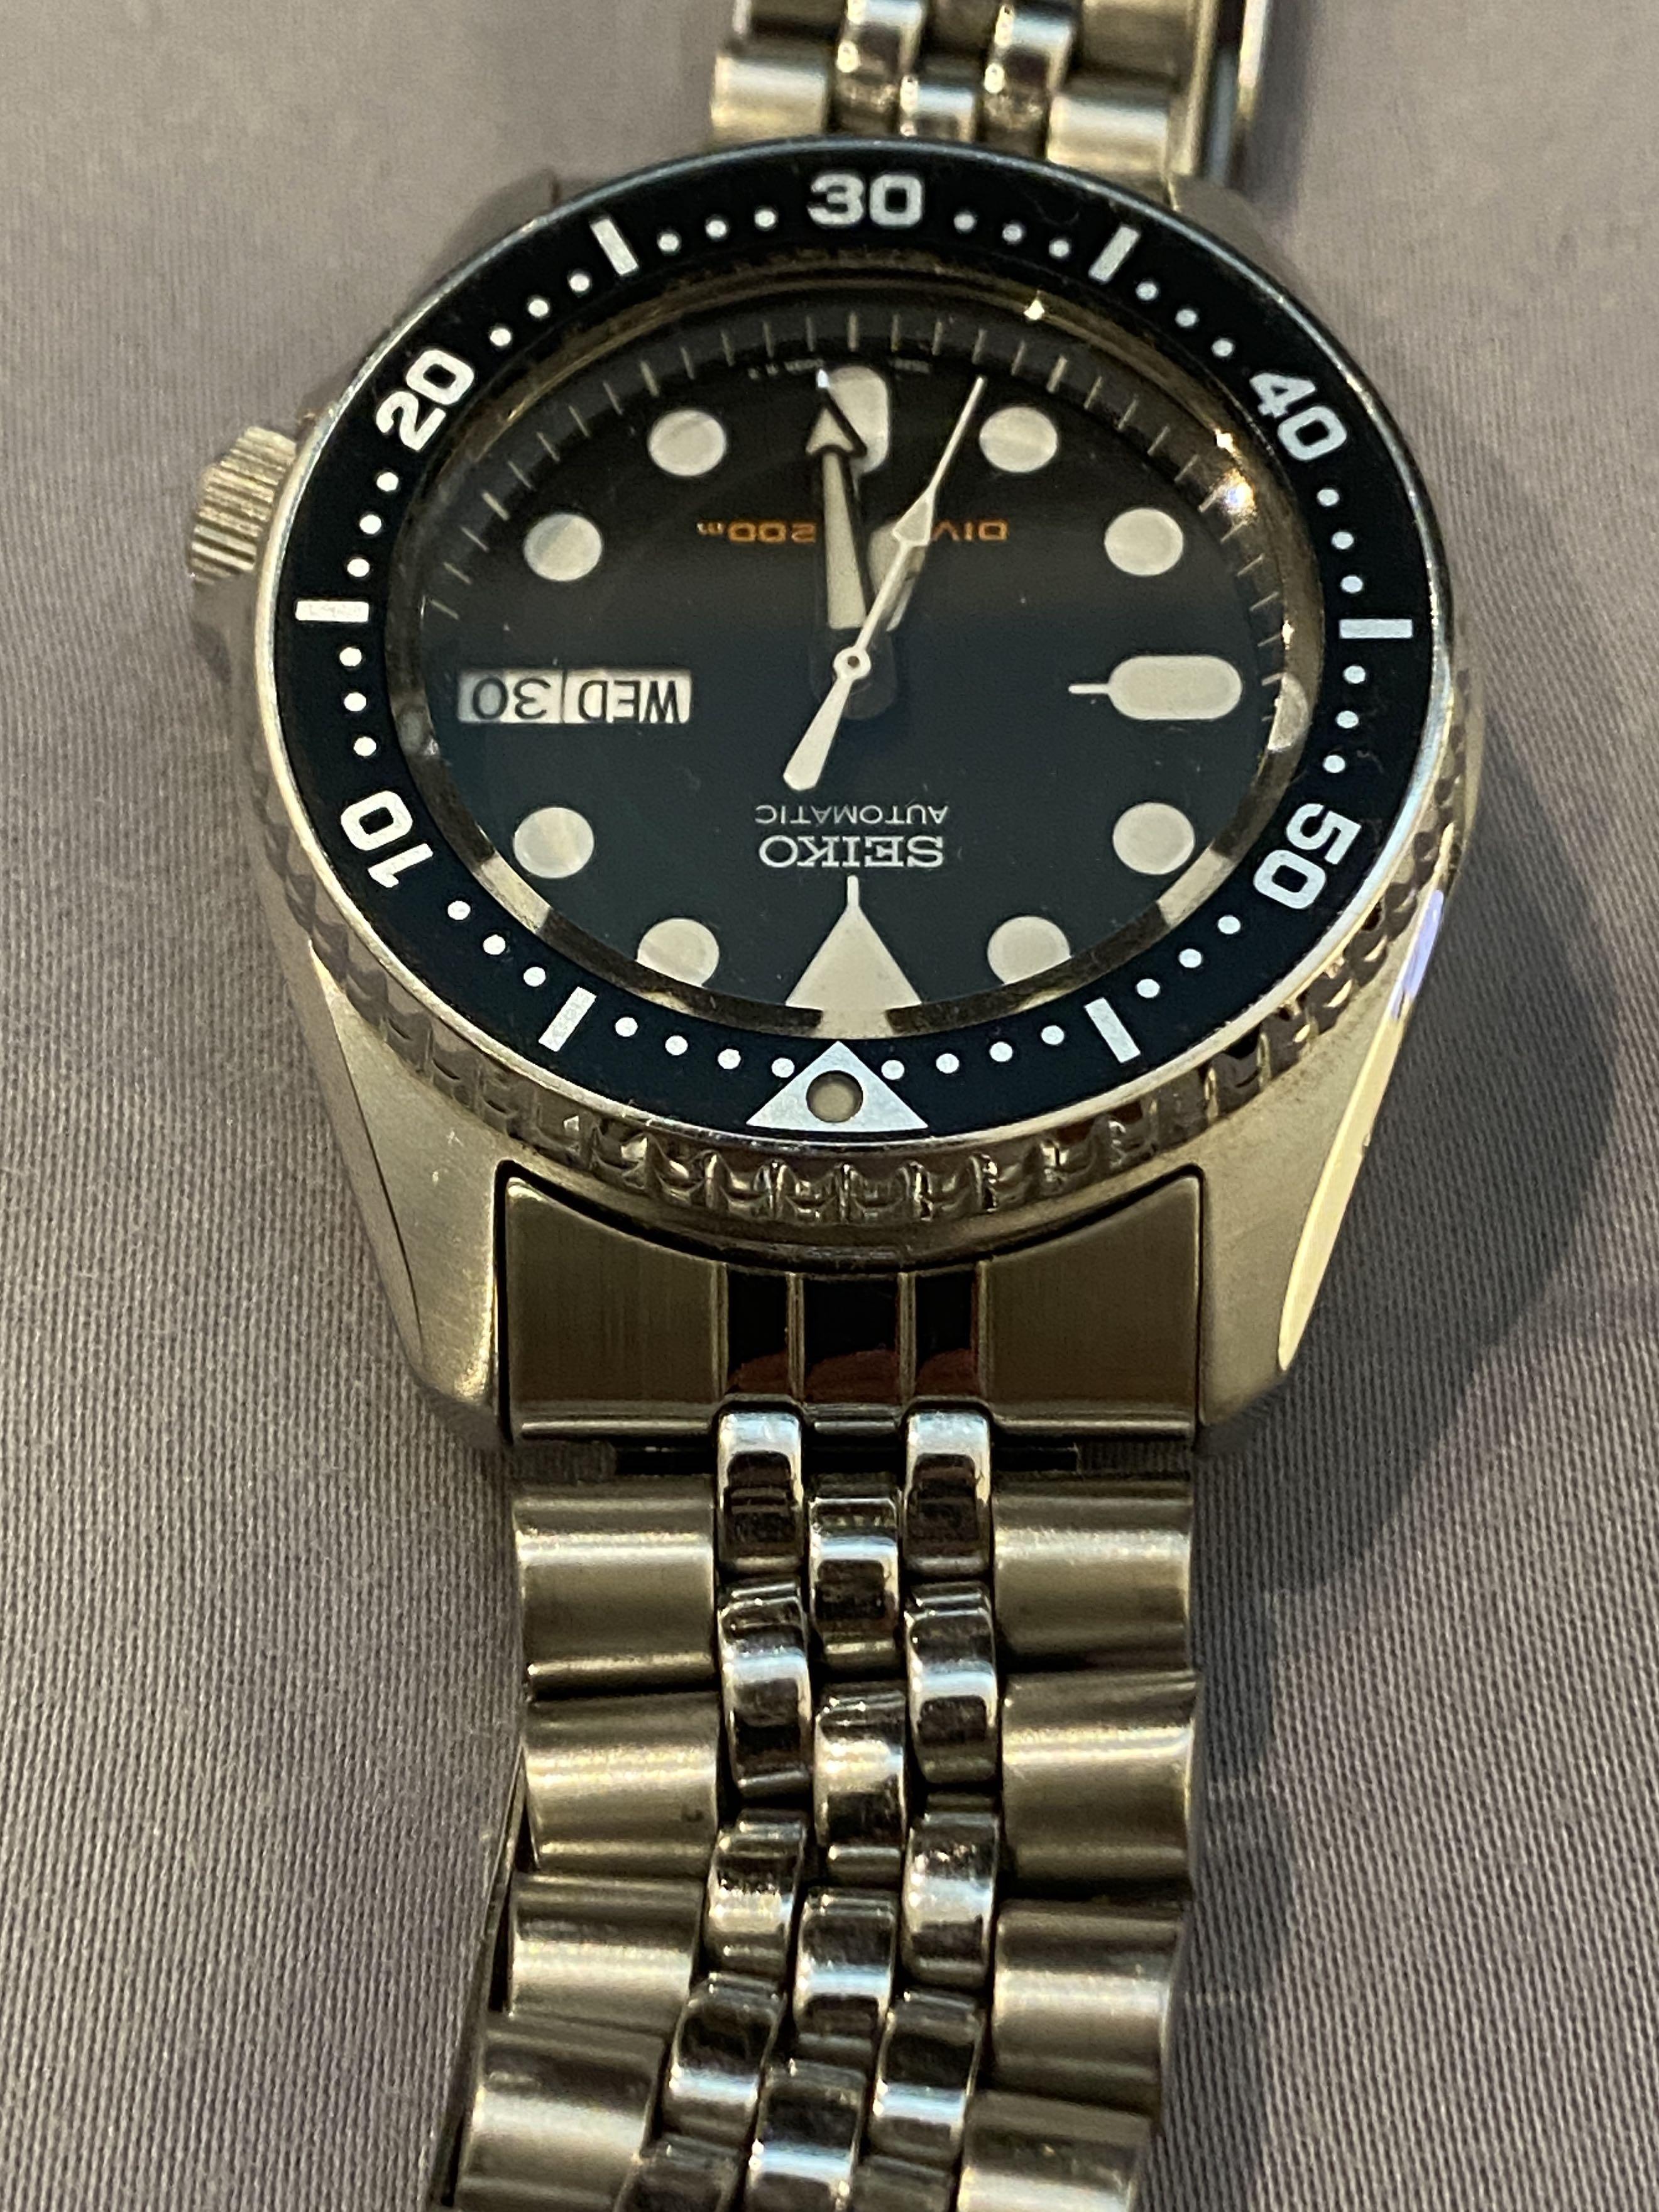 Seiko skx013 k2 jubilee bracelet full set discontinued classic watch, Men's  Fashion, Watches & Accessories, Watches on Carousell